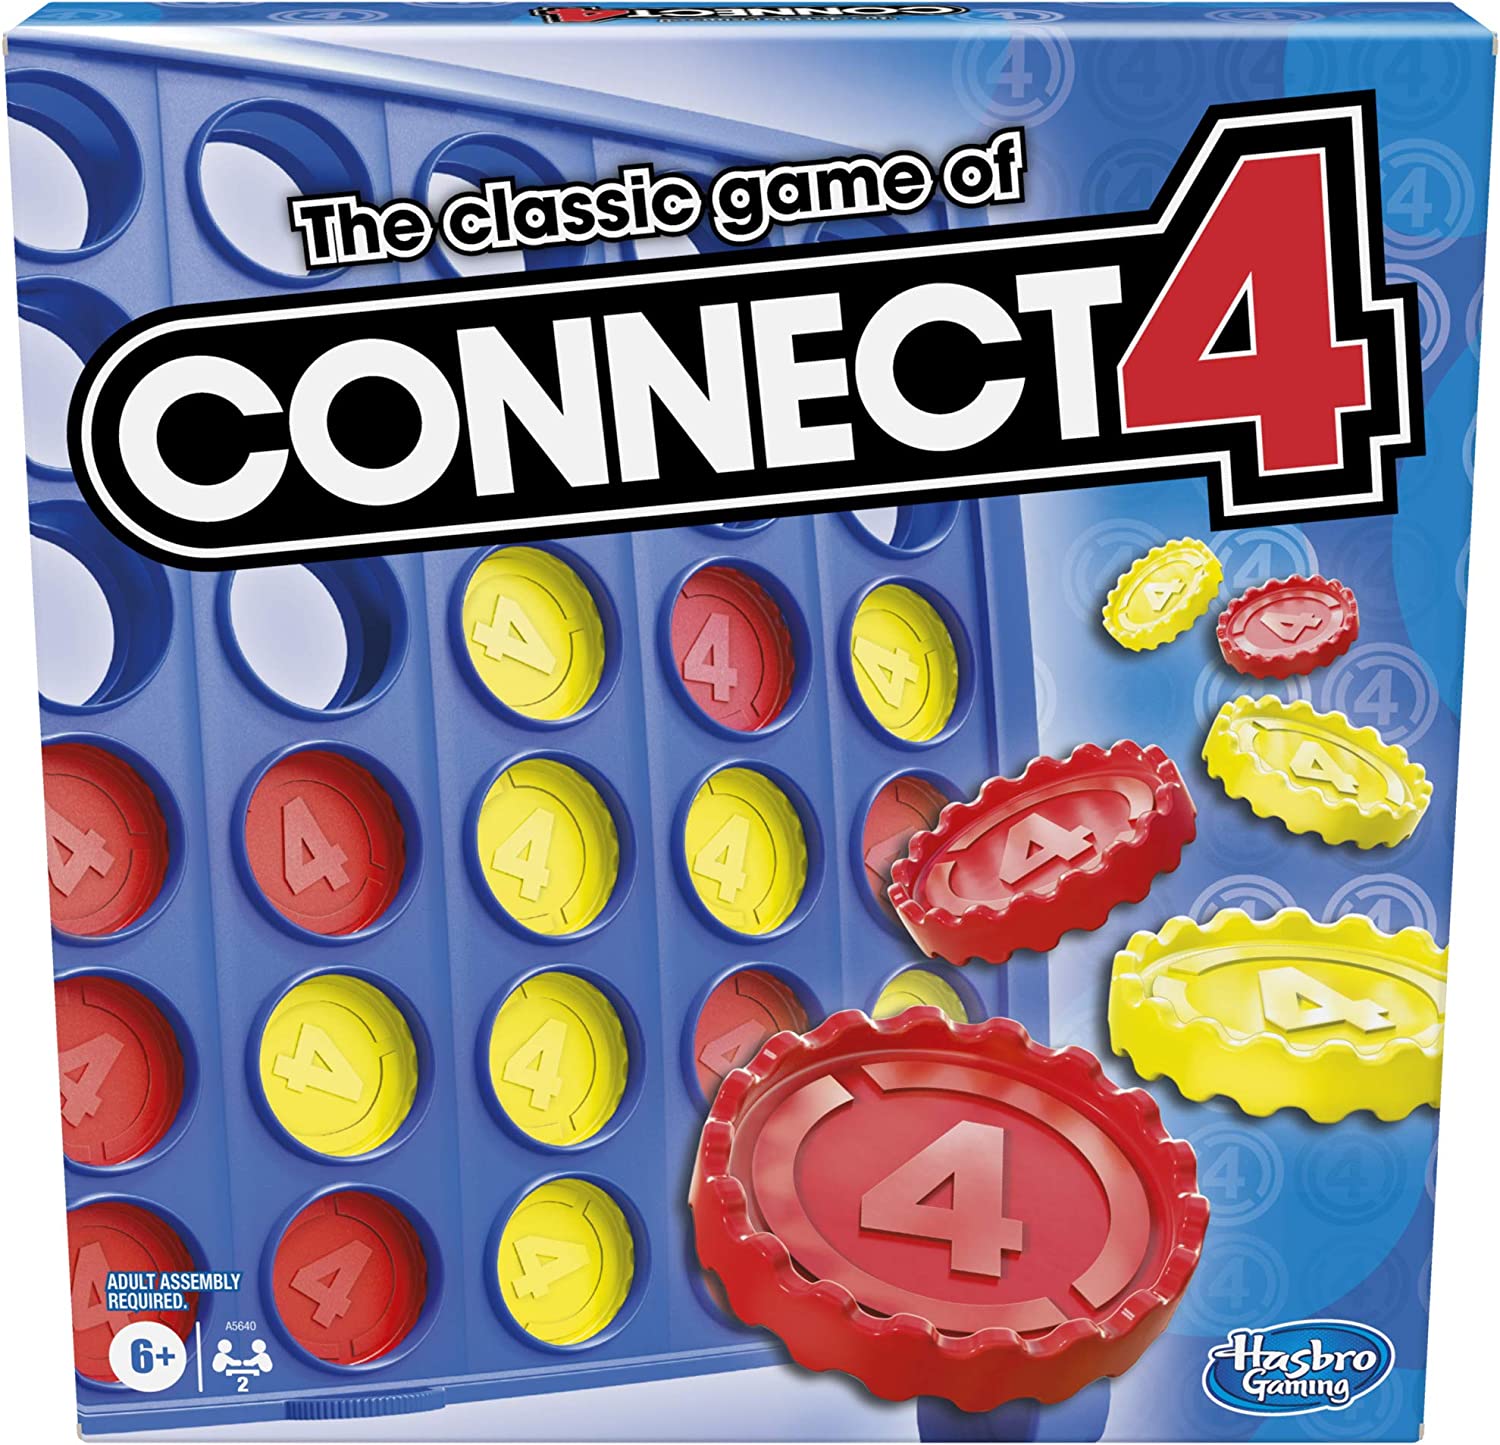 Hasbro Gaming CONNECT 4 - Classic four in a row game - Board Games and Toys - $6